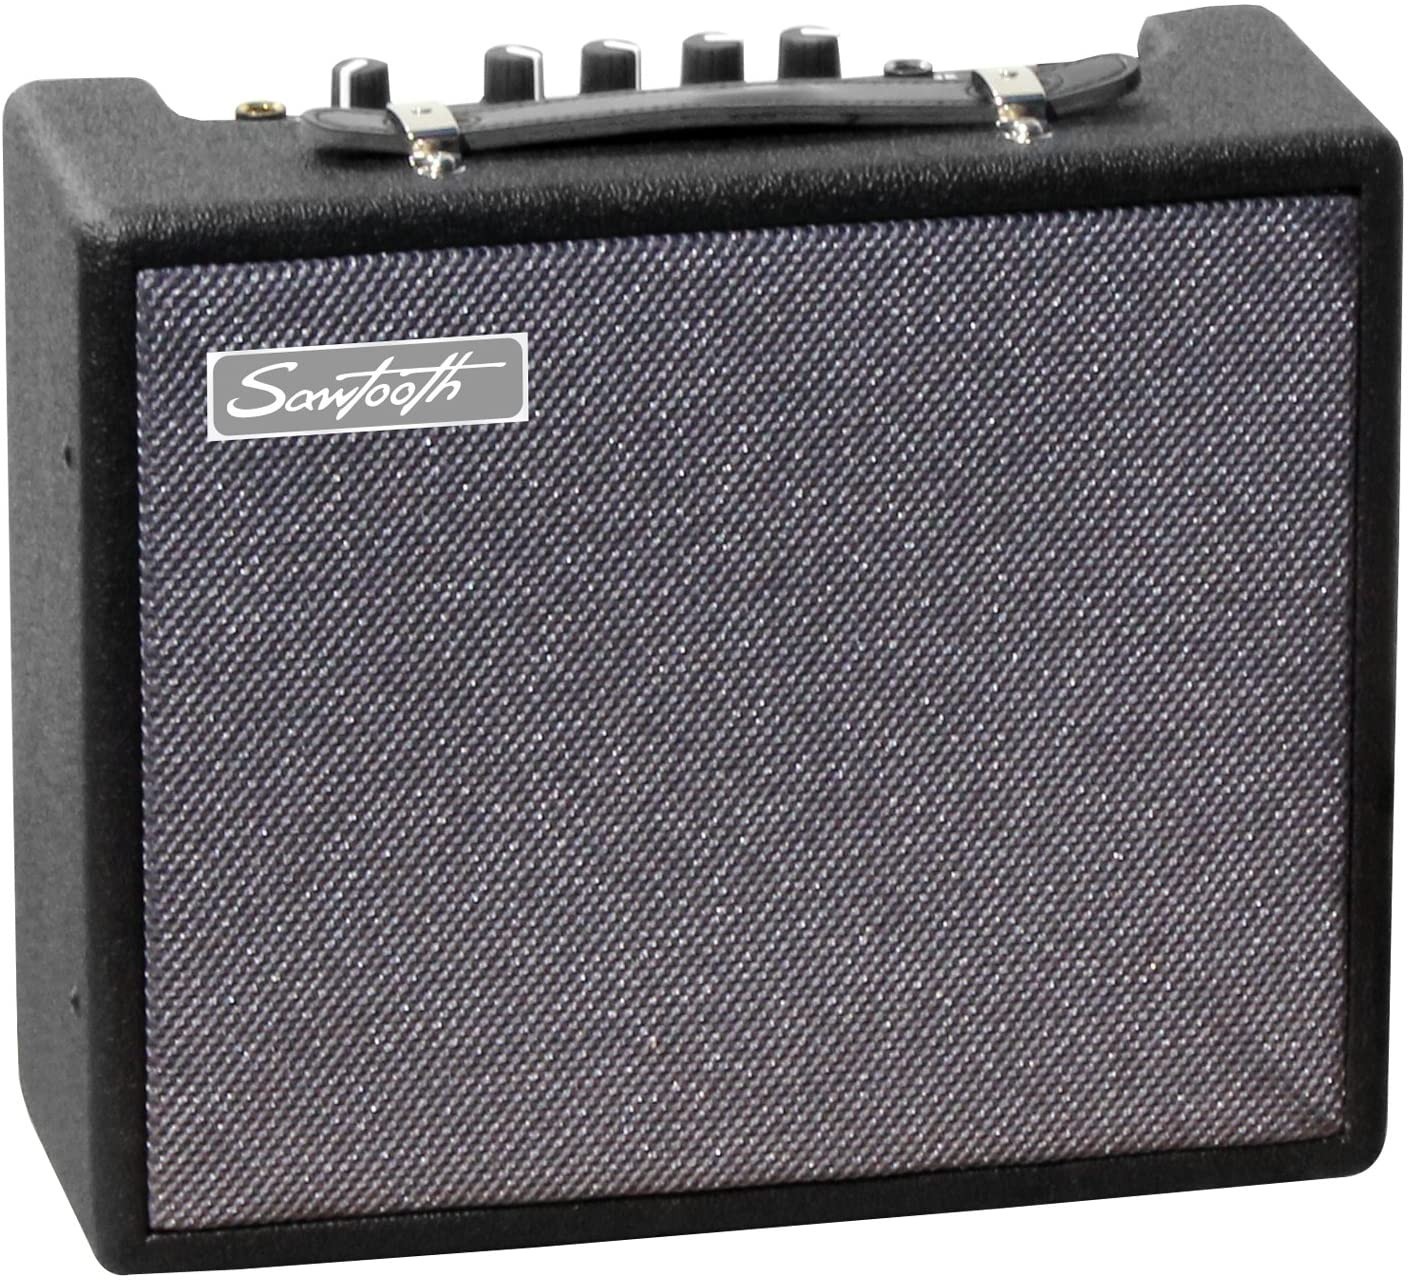 Sawtooth 10-Watt Electric Guitar Combo Amp for $17.41 + FS with Prime